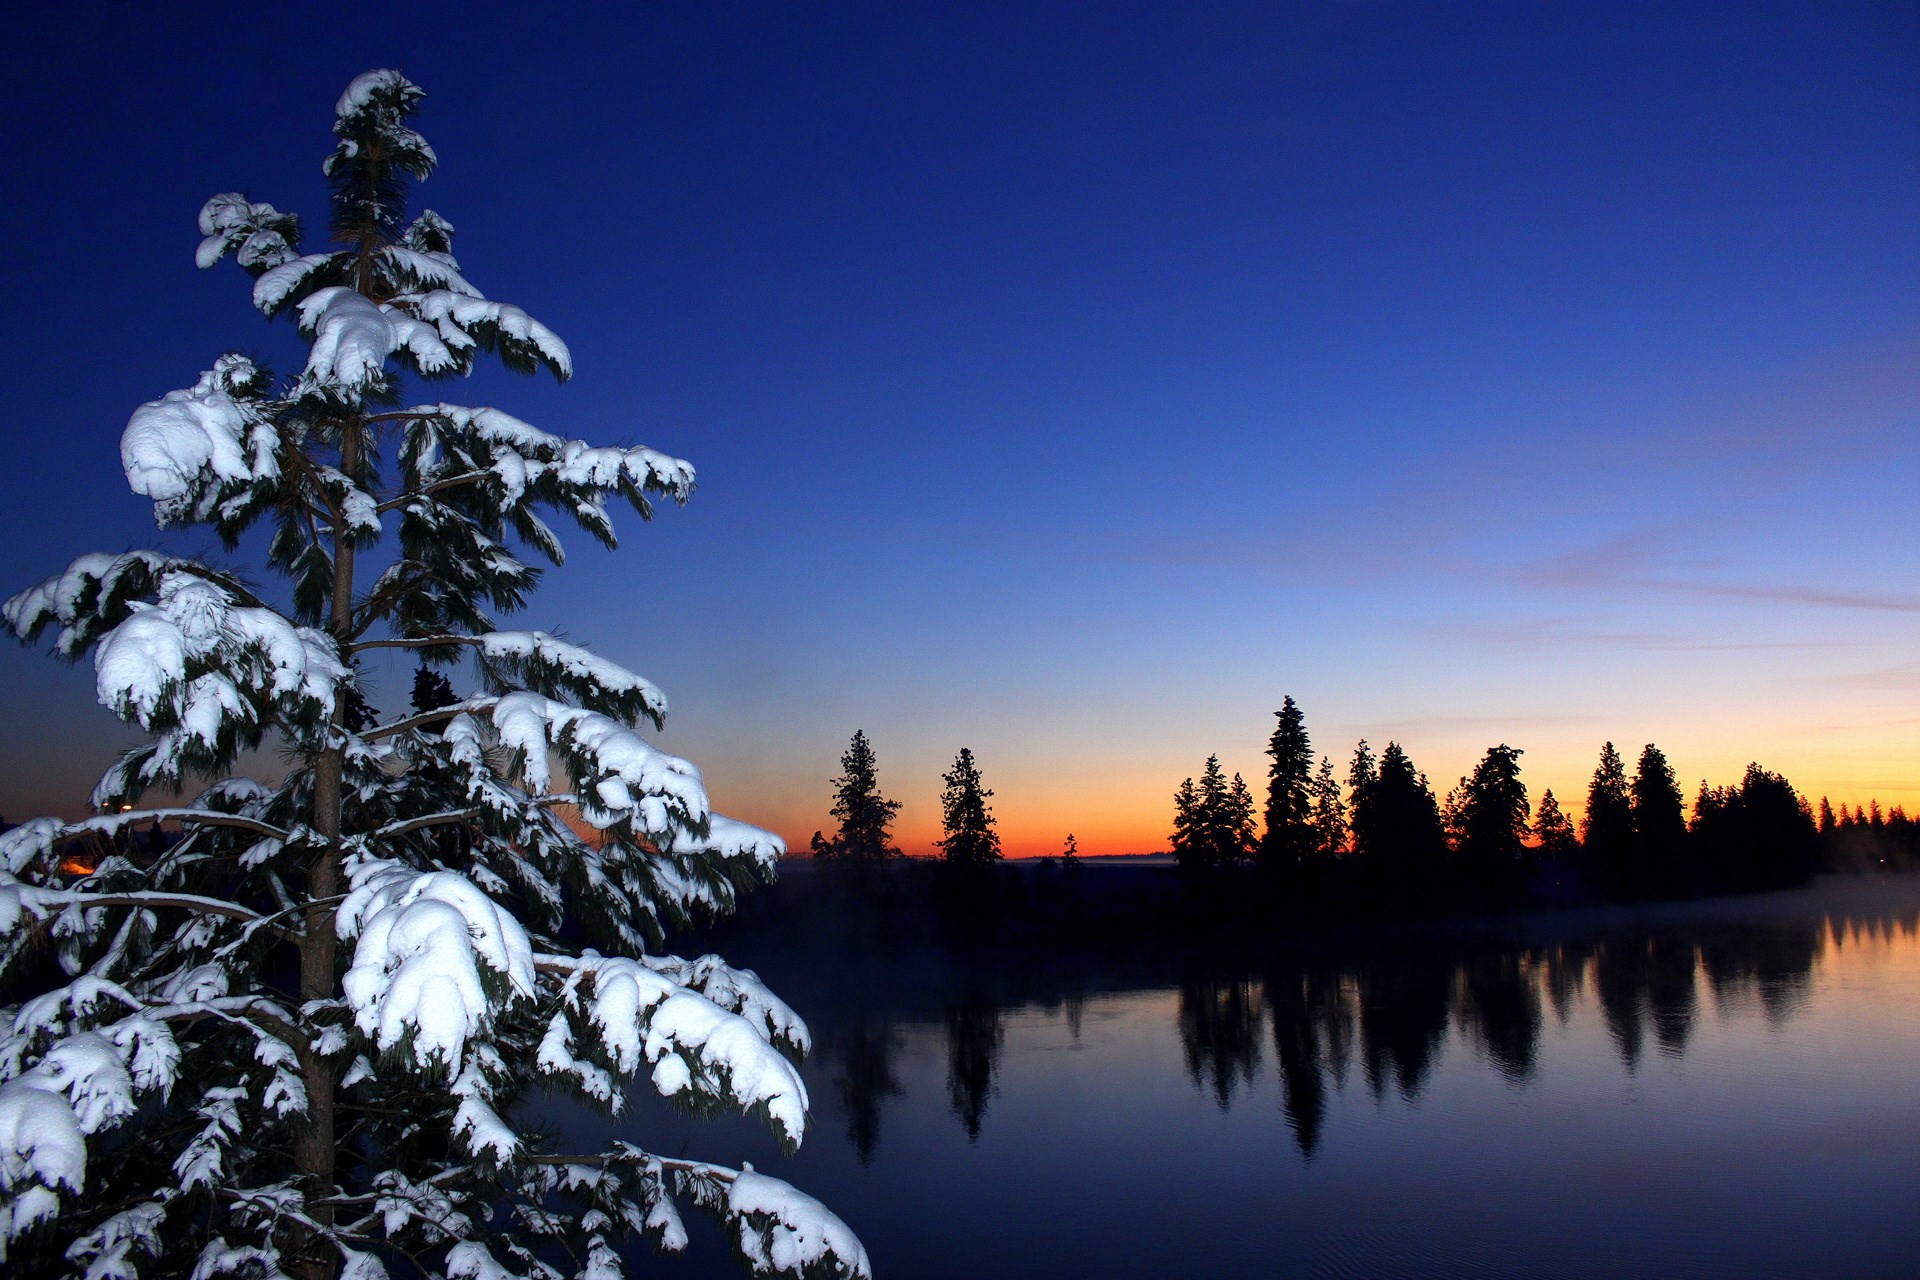 Winter theme background images, 537 kB